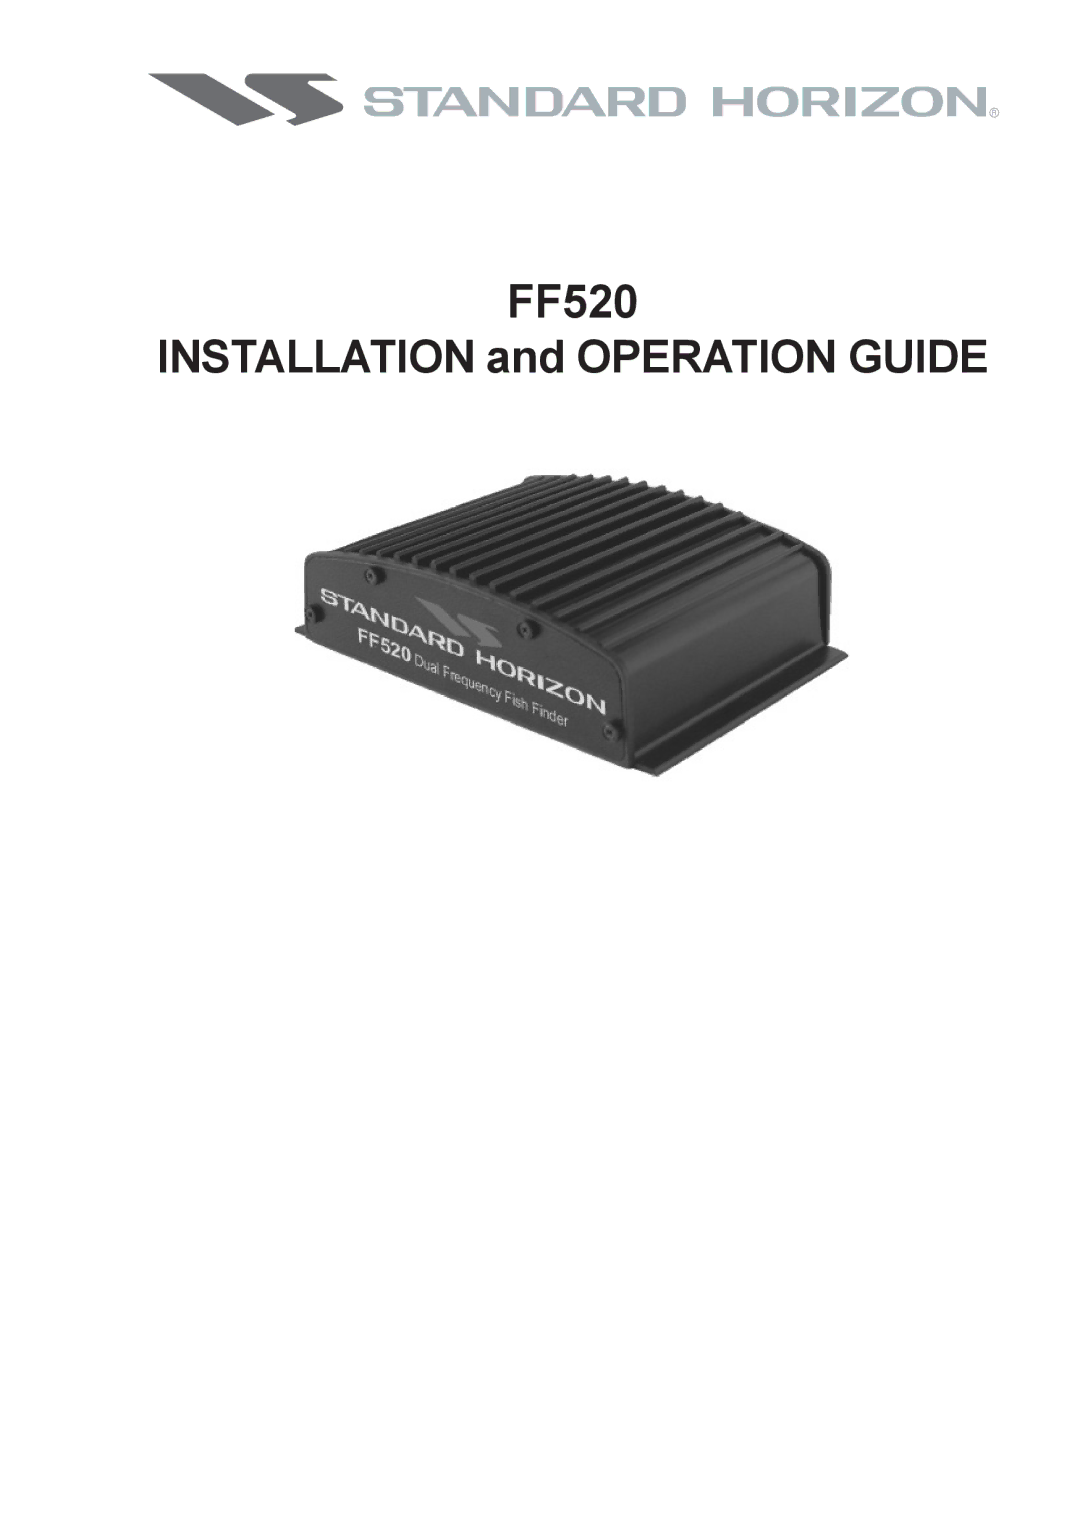 Standard Horizon Ff520 installation and operation guide FF520 